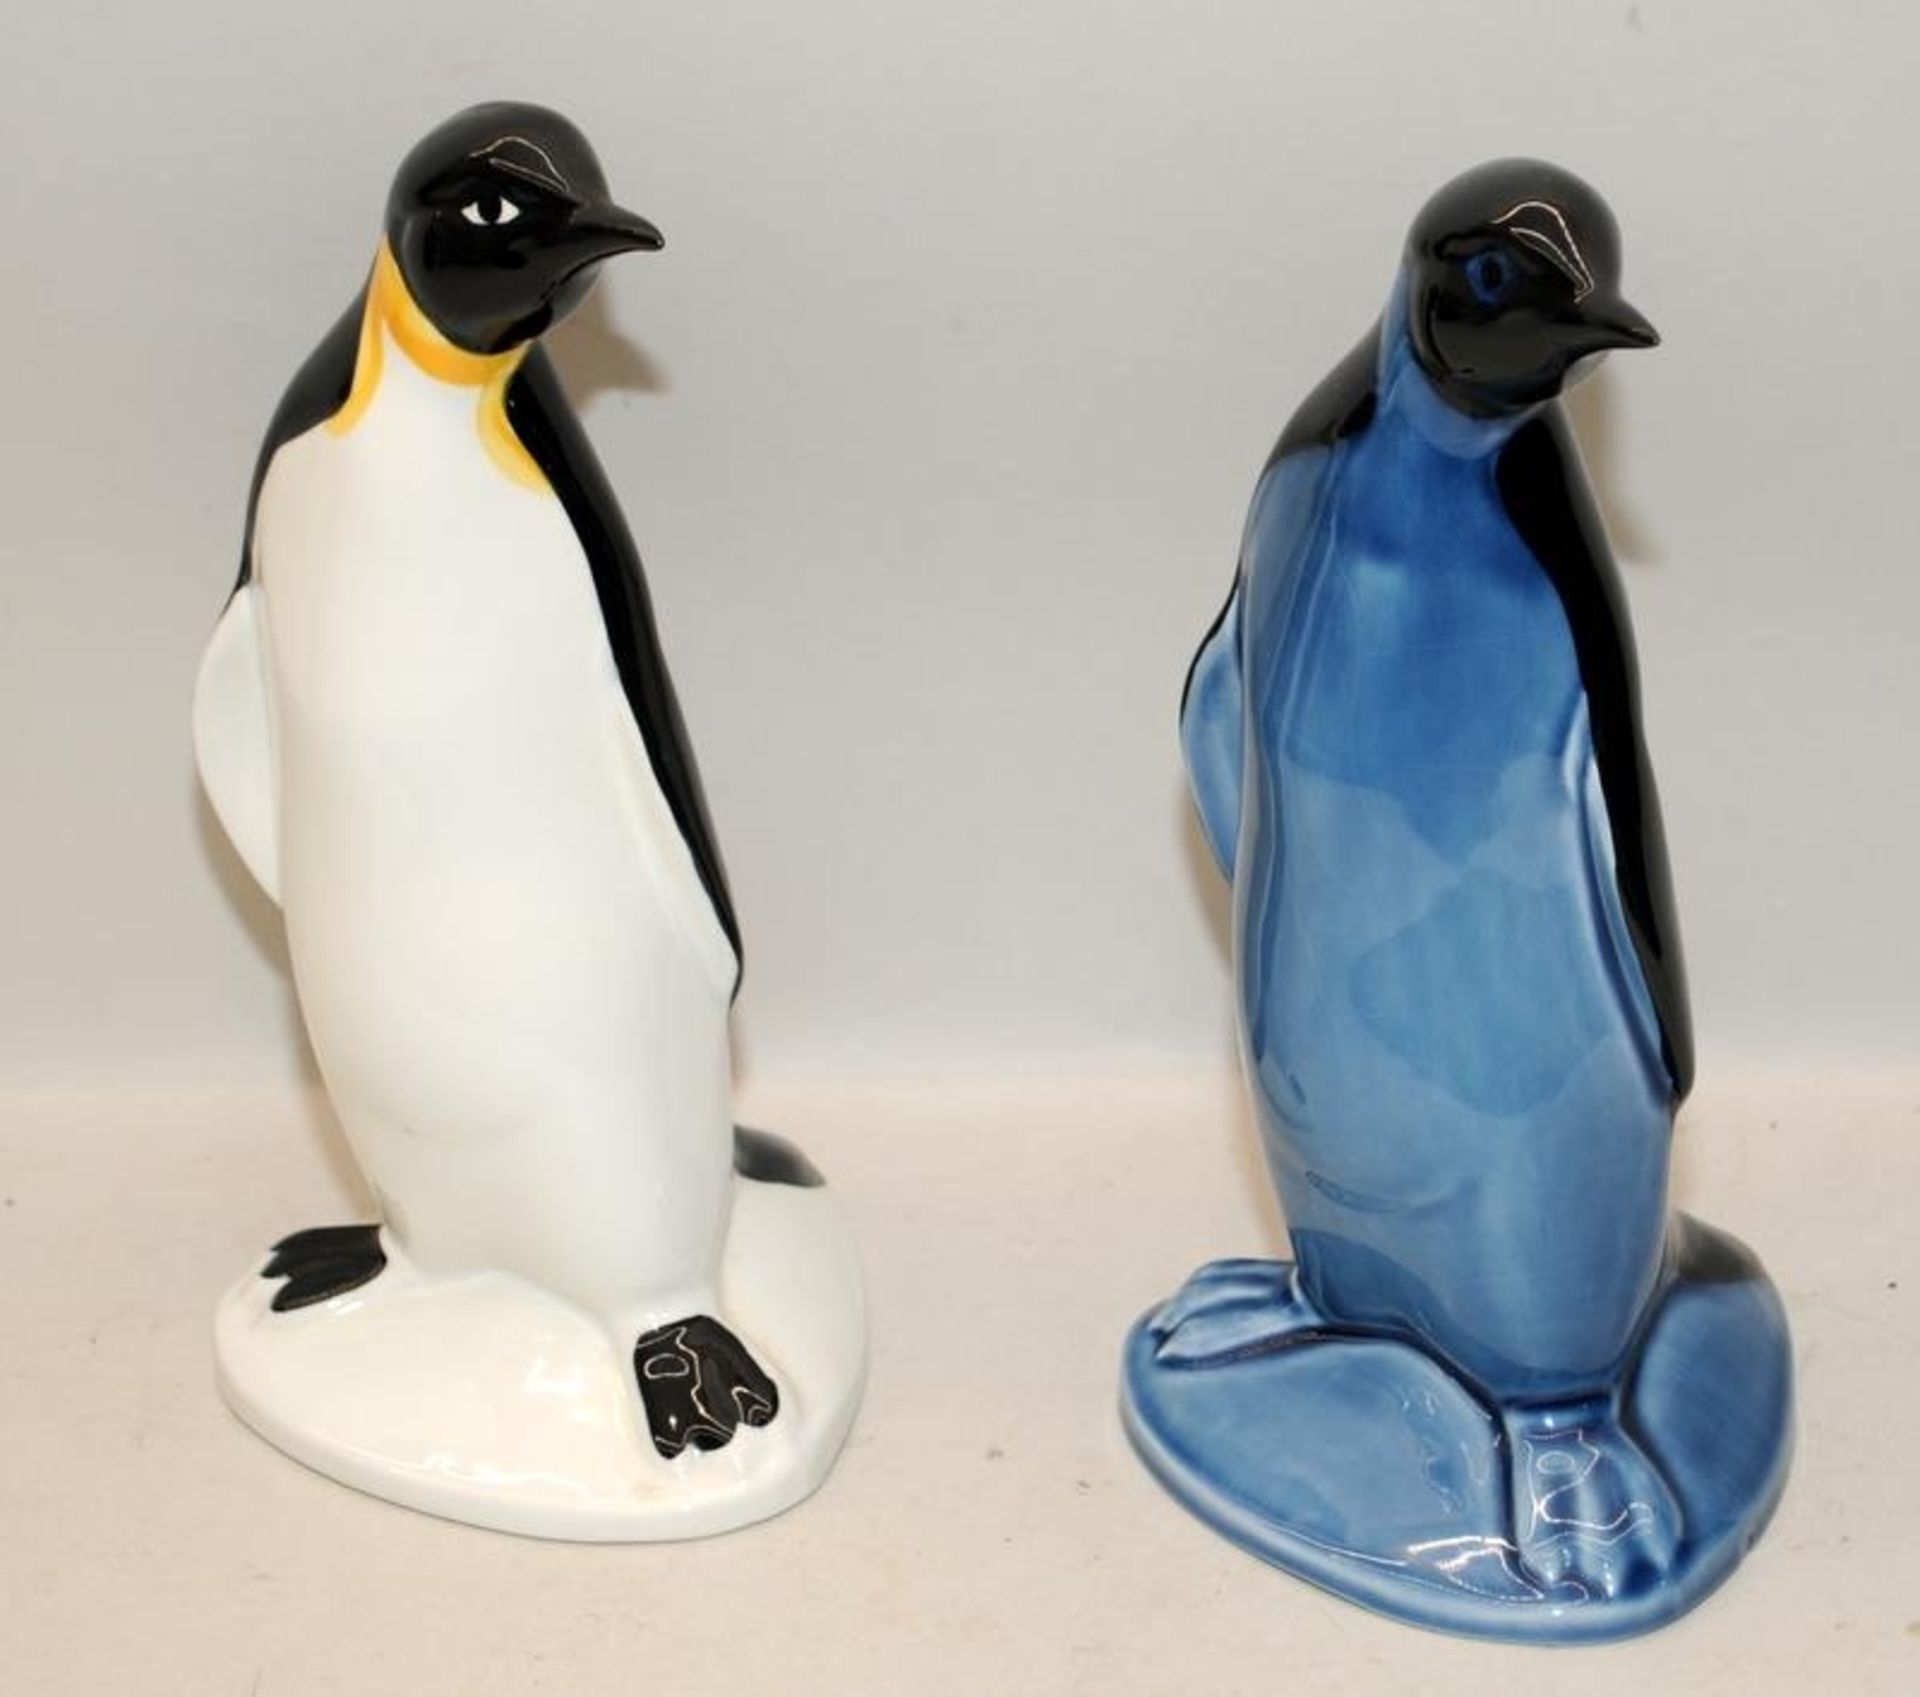 Pair of Poole Pottery large Penguins, one white and one blue. 23cms tall